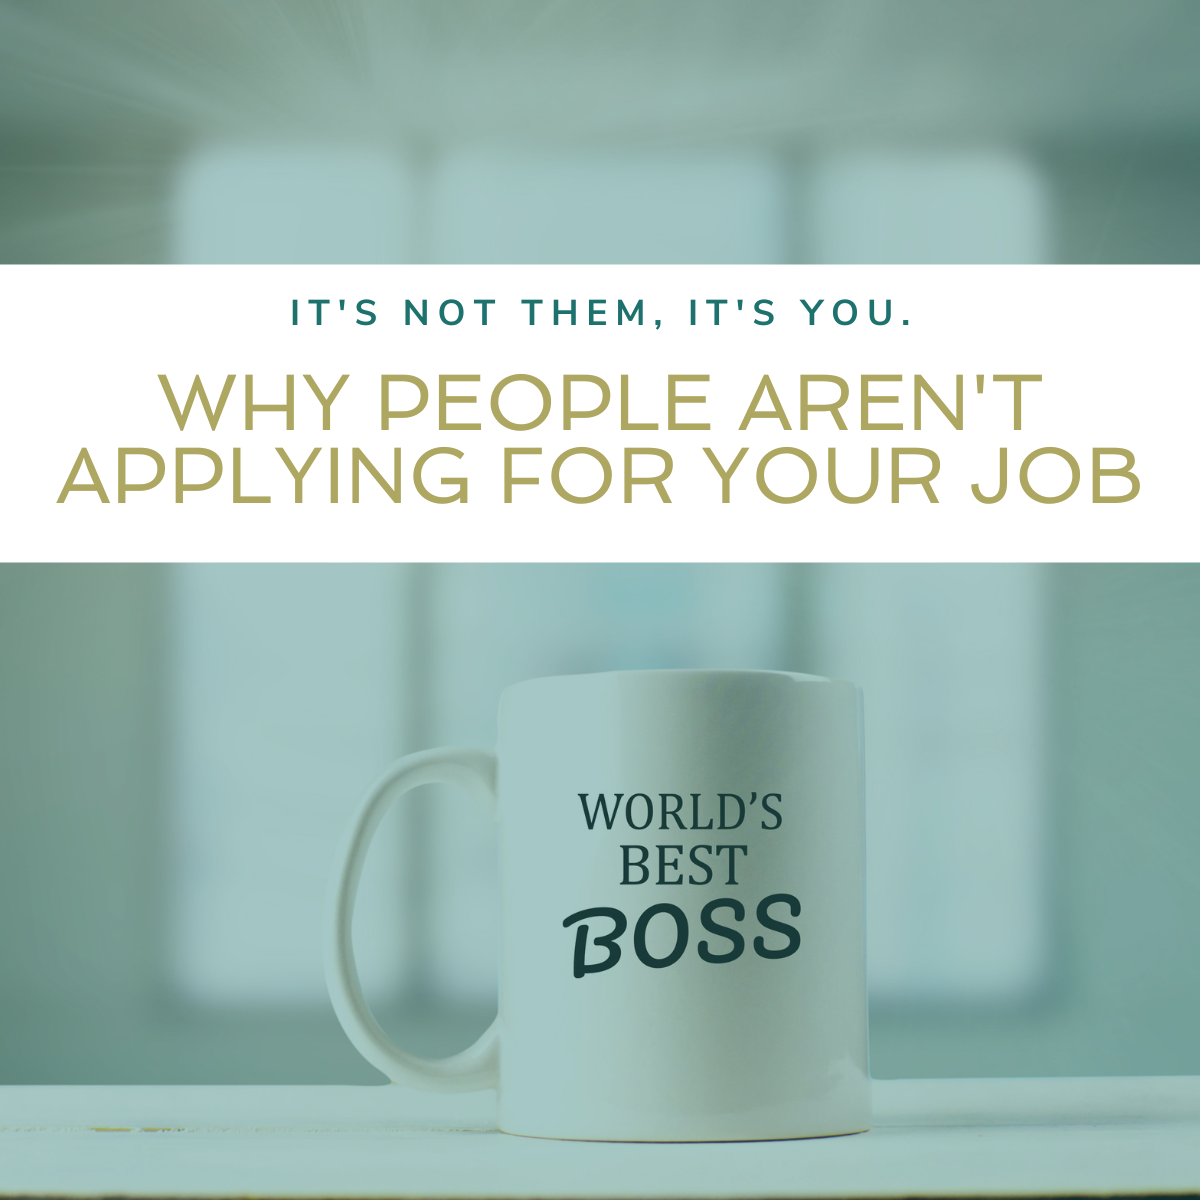 Title image for blog post on why people aren't applying for your job featuring a 